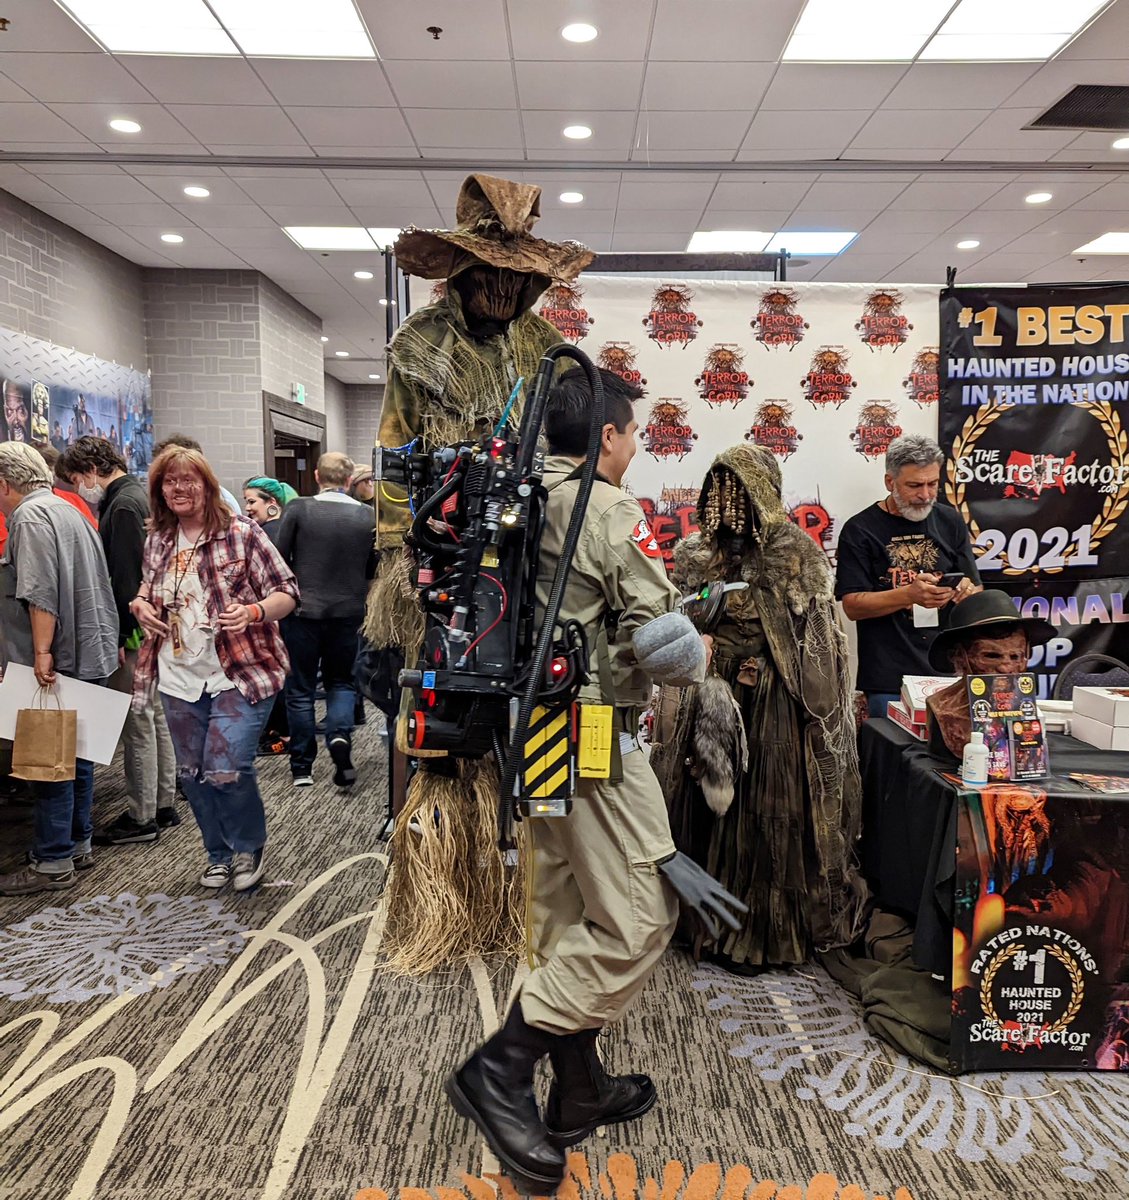 It’s #FlashbackFriday & we’re looking at last year while looking forward to this year! #ColoradoFestivalOfHorror: Slasher Hotel will take place September 15-17 😱 Who or what are you hoping to see at #COFOH2023? 🔪🩸 #horrorcommunity #horrorevents #denverevents